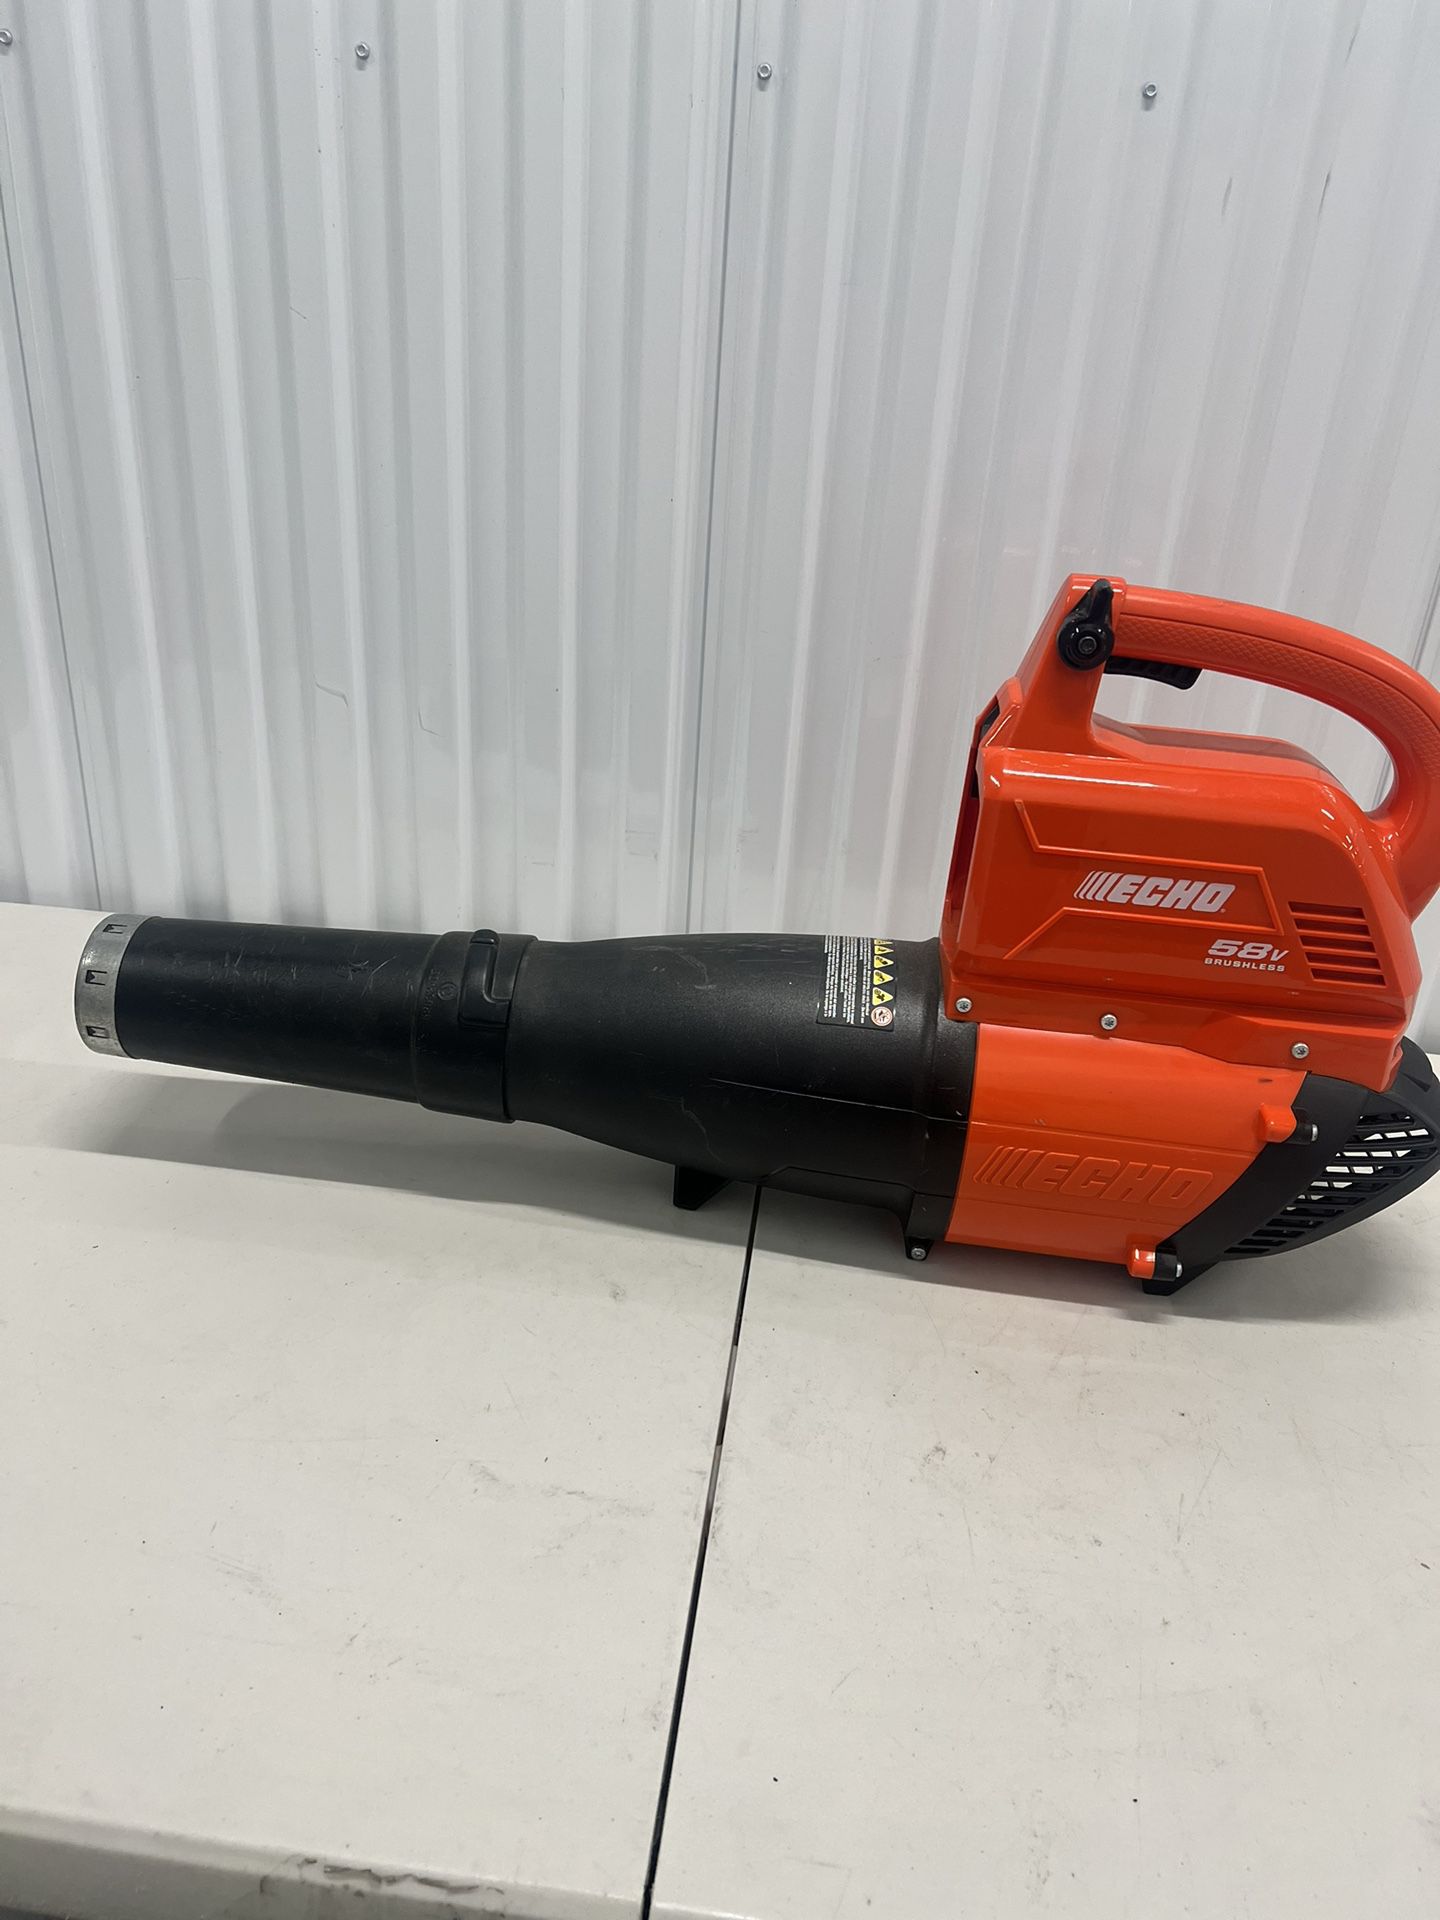 Echo CBL-58V 58 Volt Cordless Leaf Blower NO BATTERY, No Charger. BARE TOOL ONLY. Used in good condition with minor cosmetic blemishes from normal usa